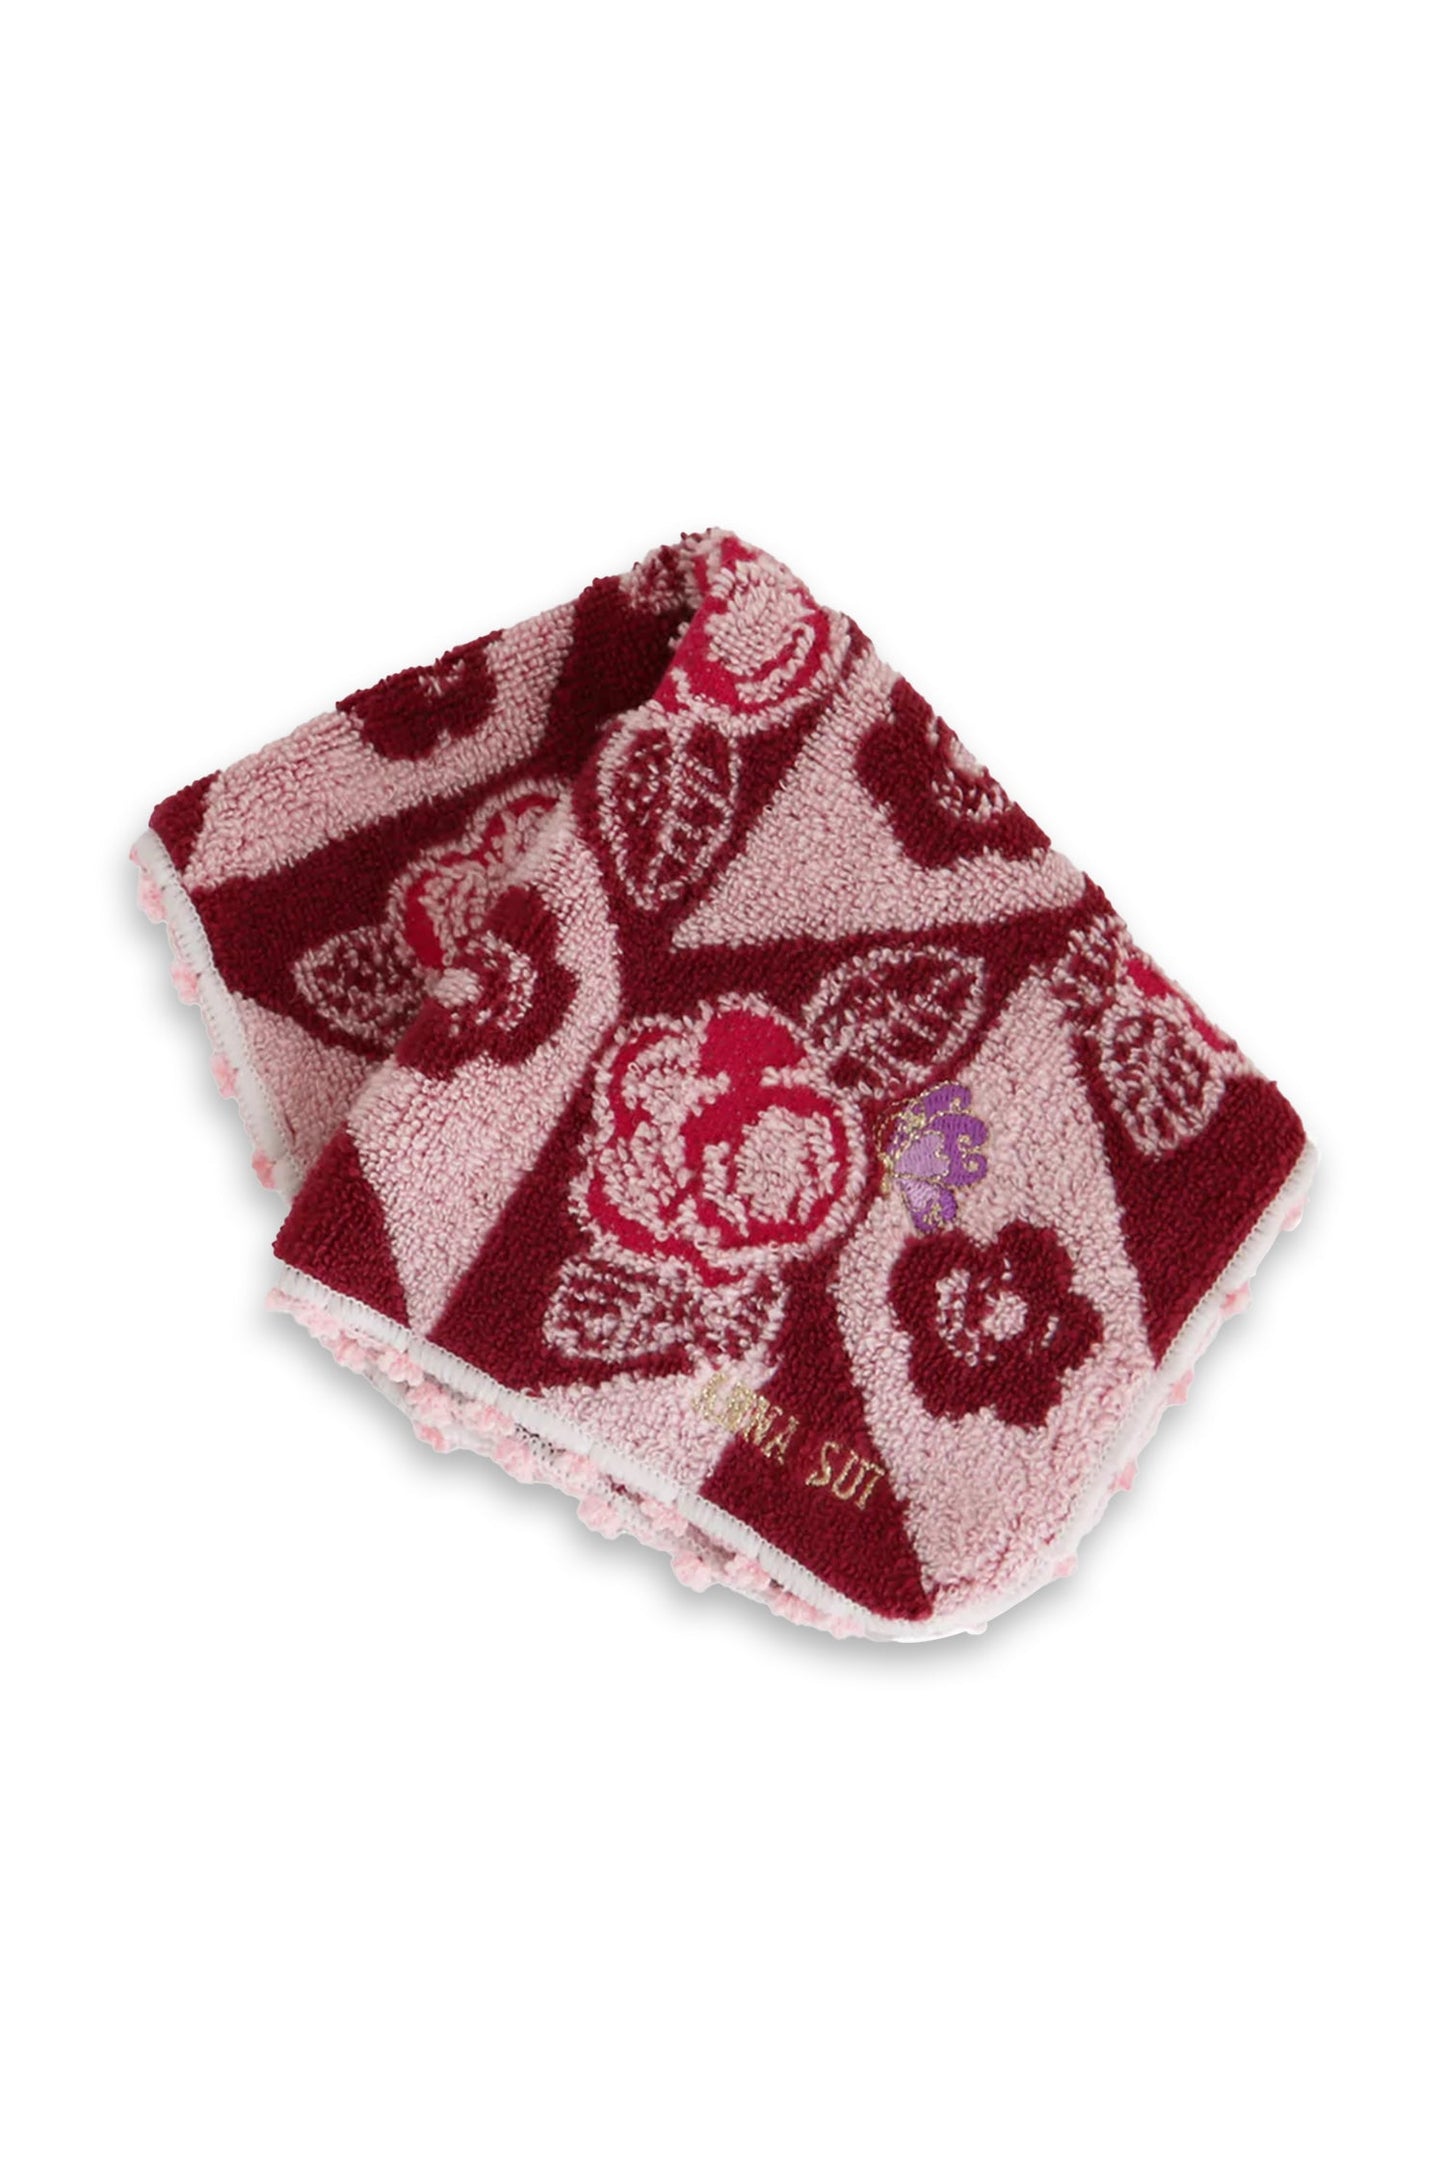 Zig Zag Roses Washcloth, alternate burgundy/red, Anna Sui label on the edge, purple butterfly above it